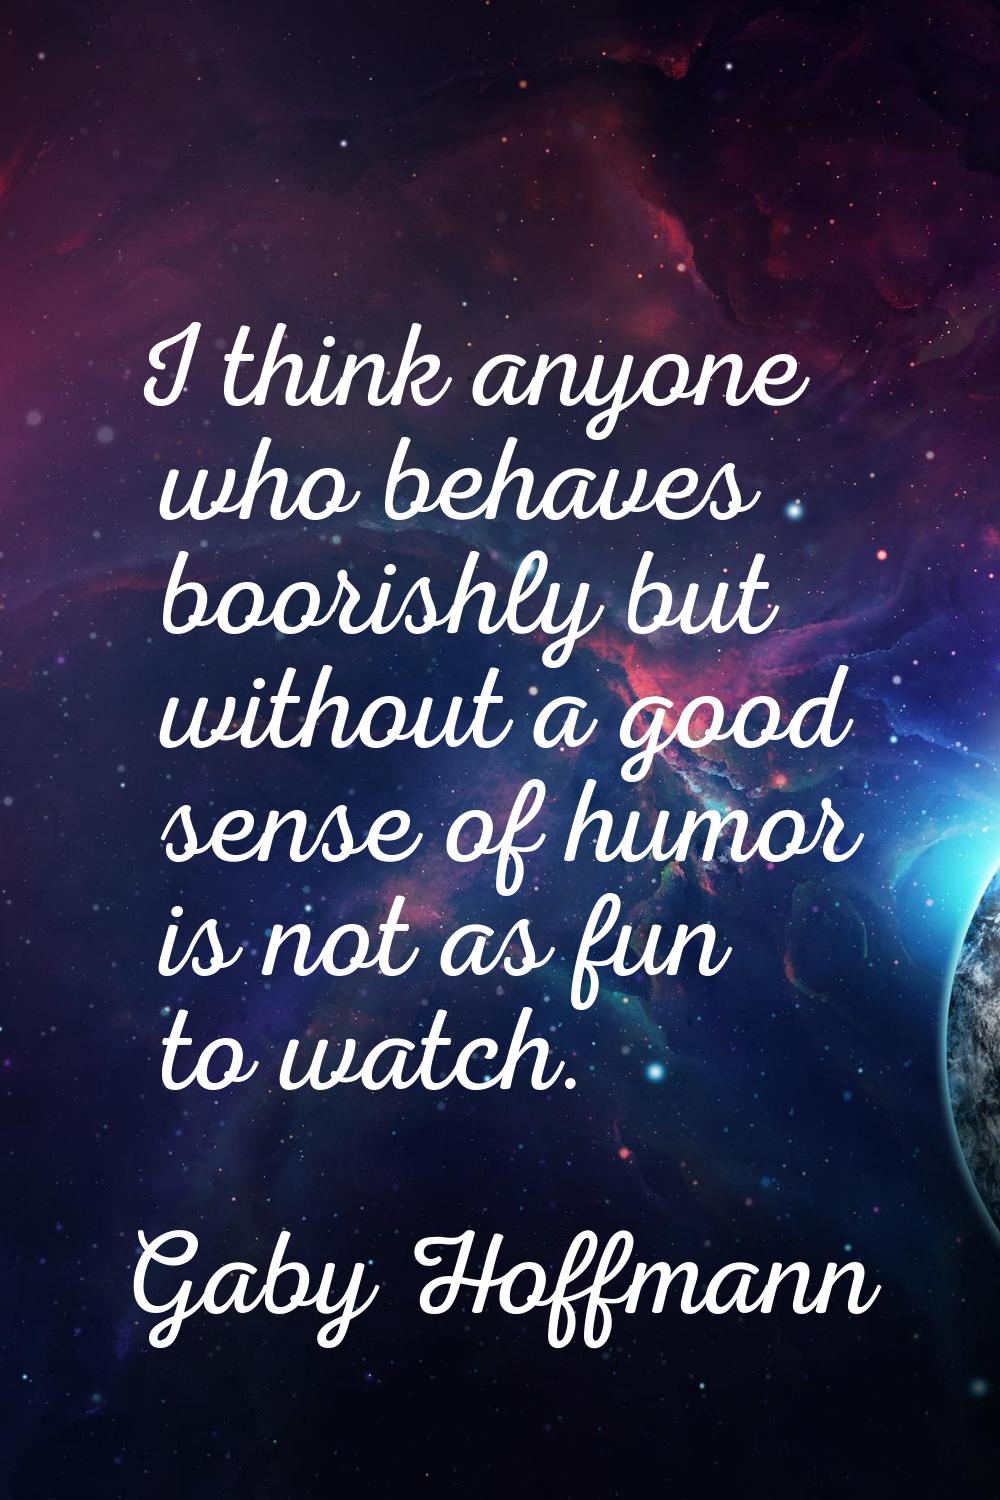 I think anyone who behaves boorishly but without a good sense of humor is not as fun to watch.